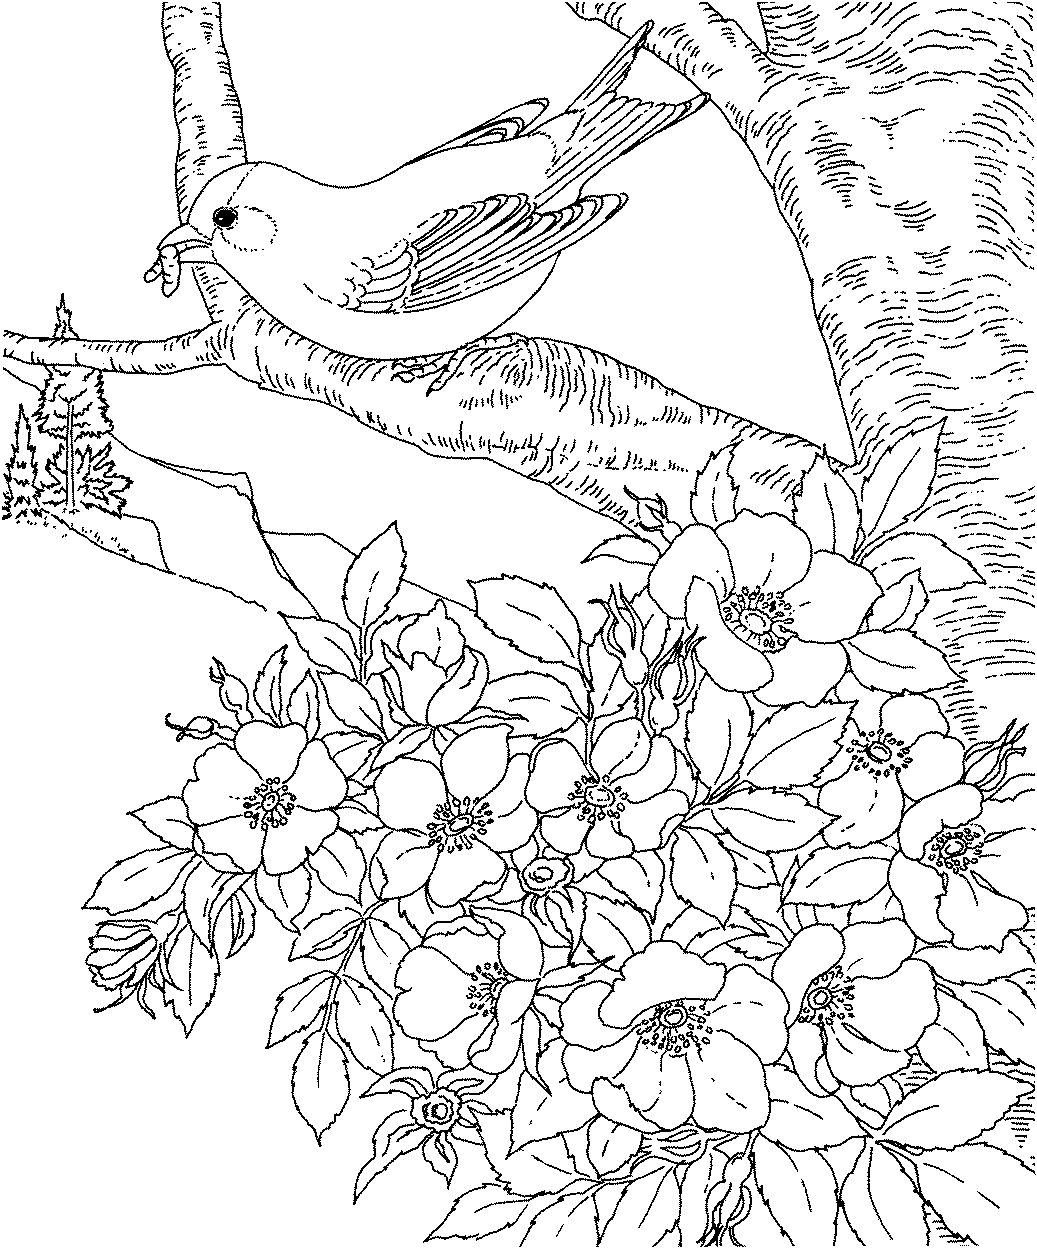 birdsandblooms coloring book state flower and state bird coloring page book coloring birdsandblooms 